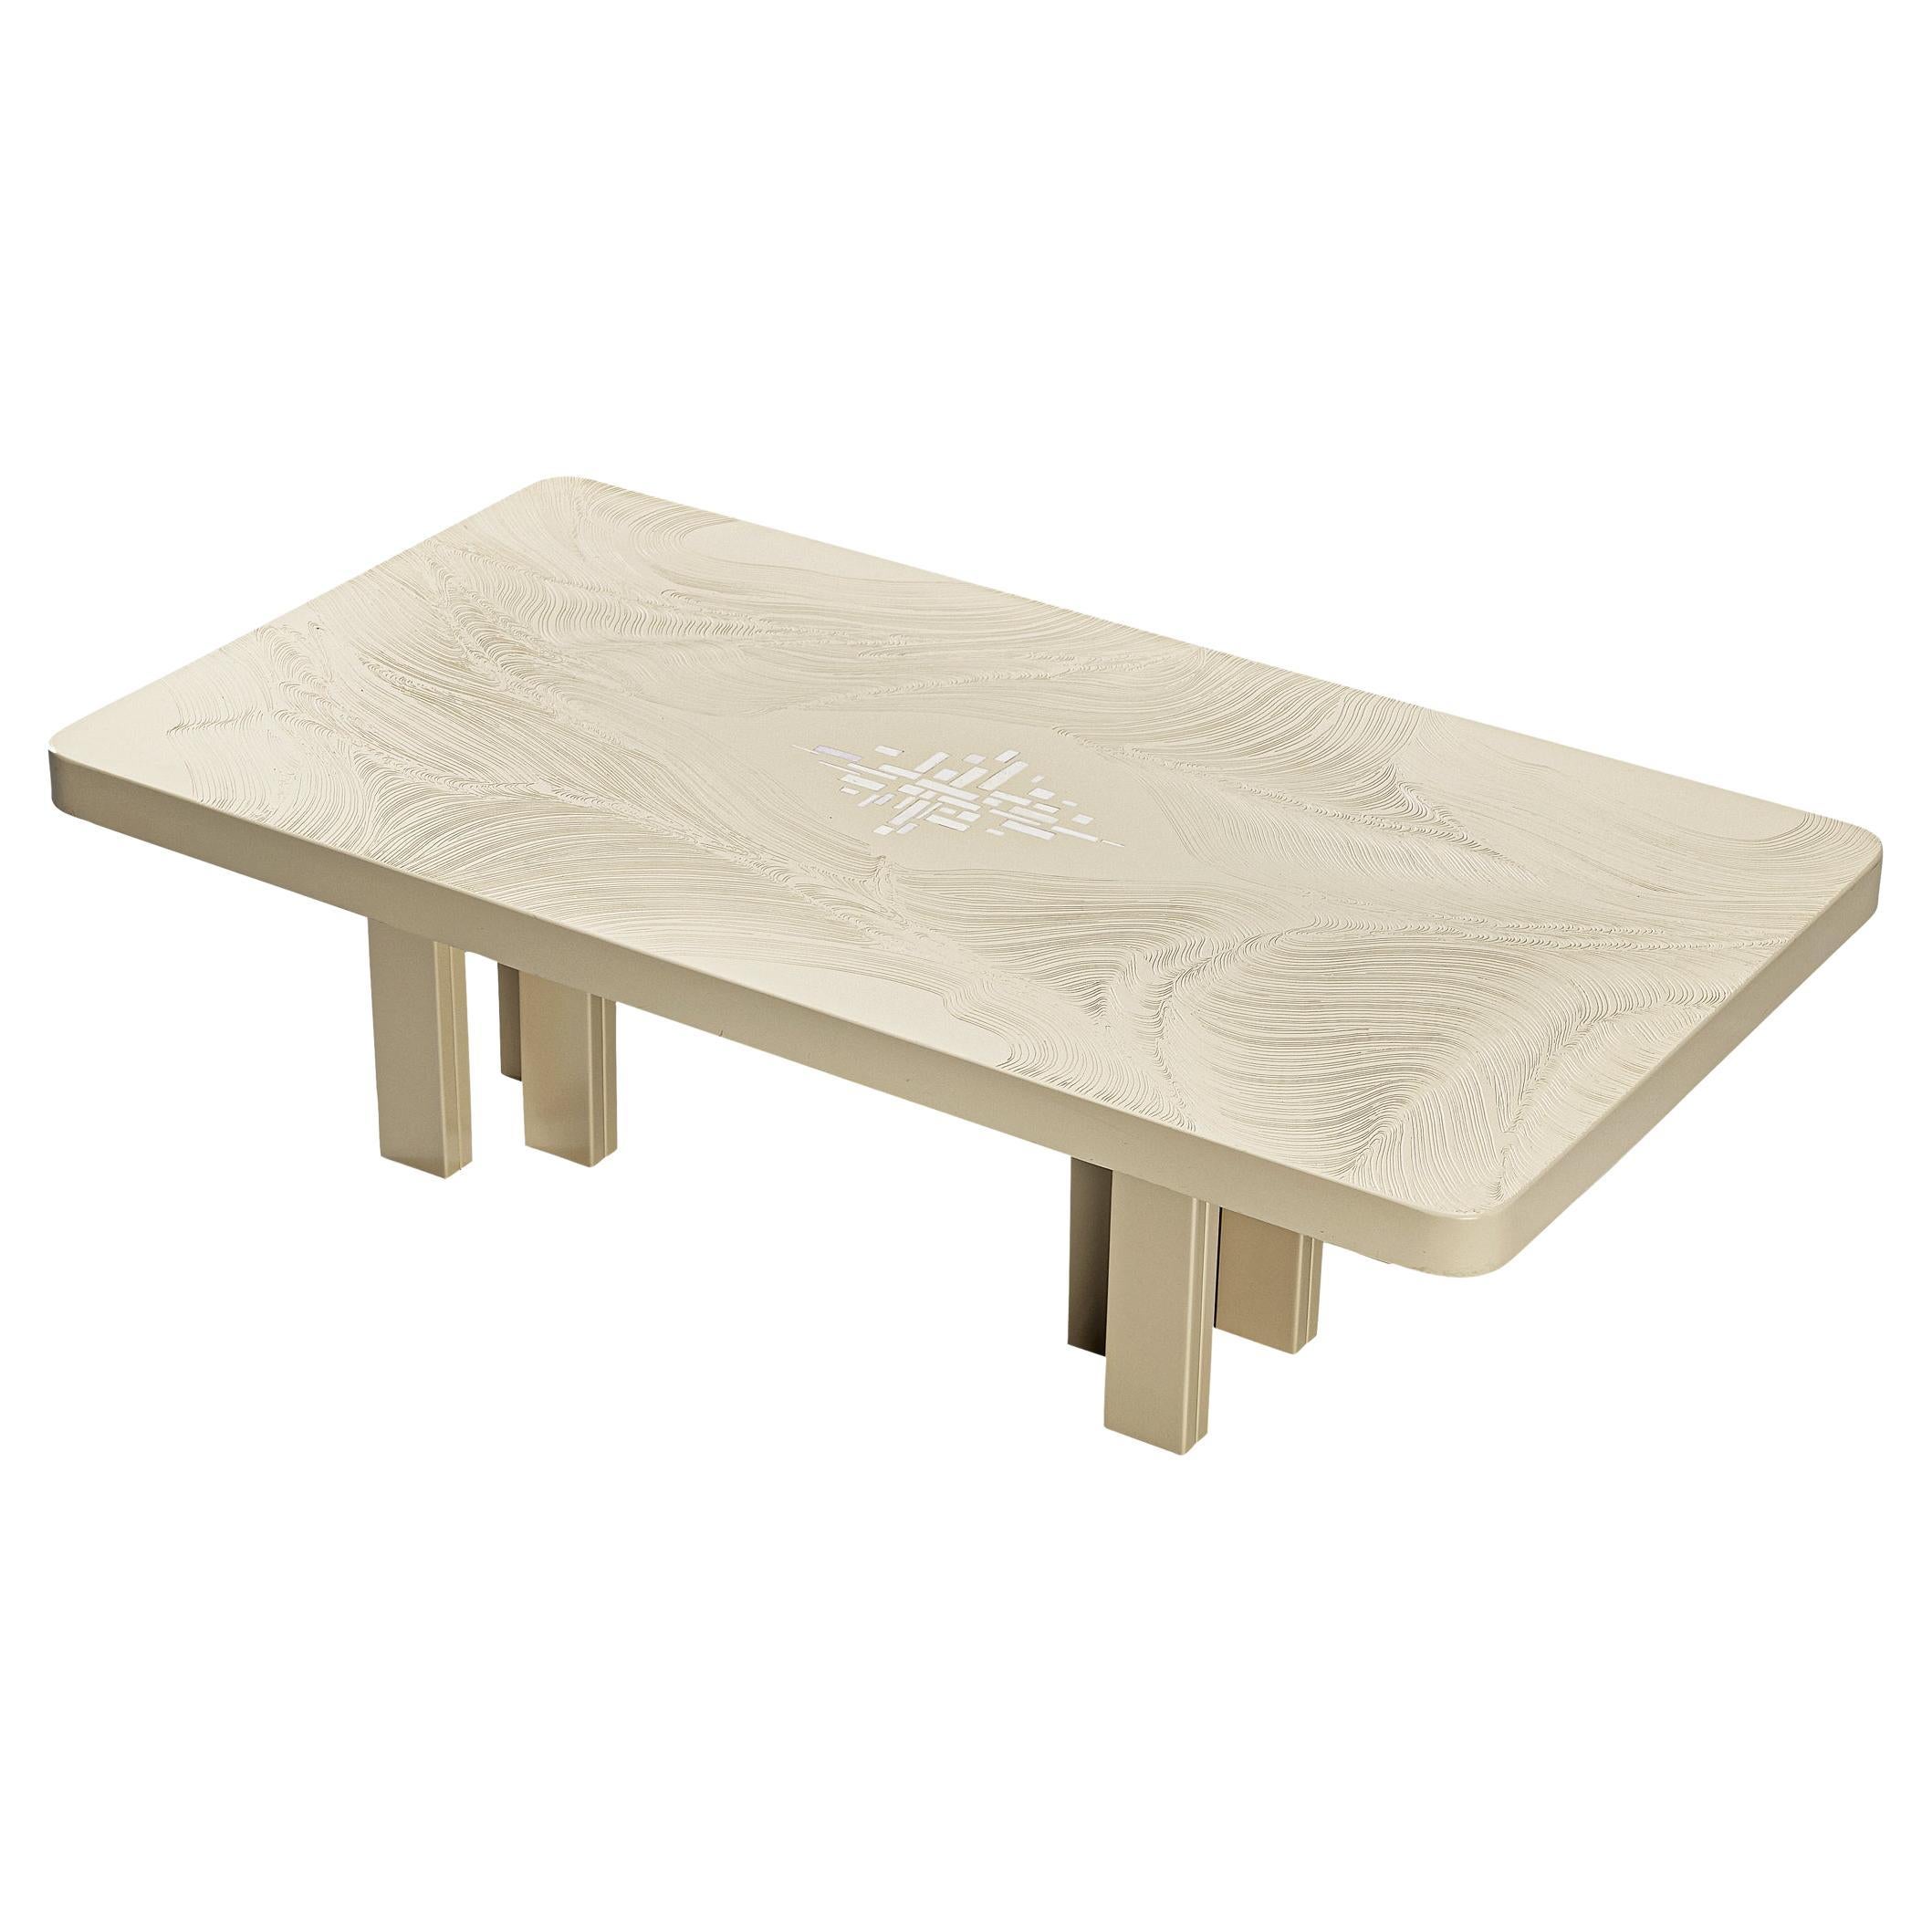 Jean Claude Dresse Coffee Table in Resin with Bone Inlay 